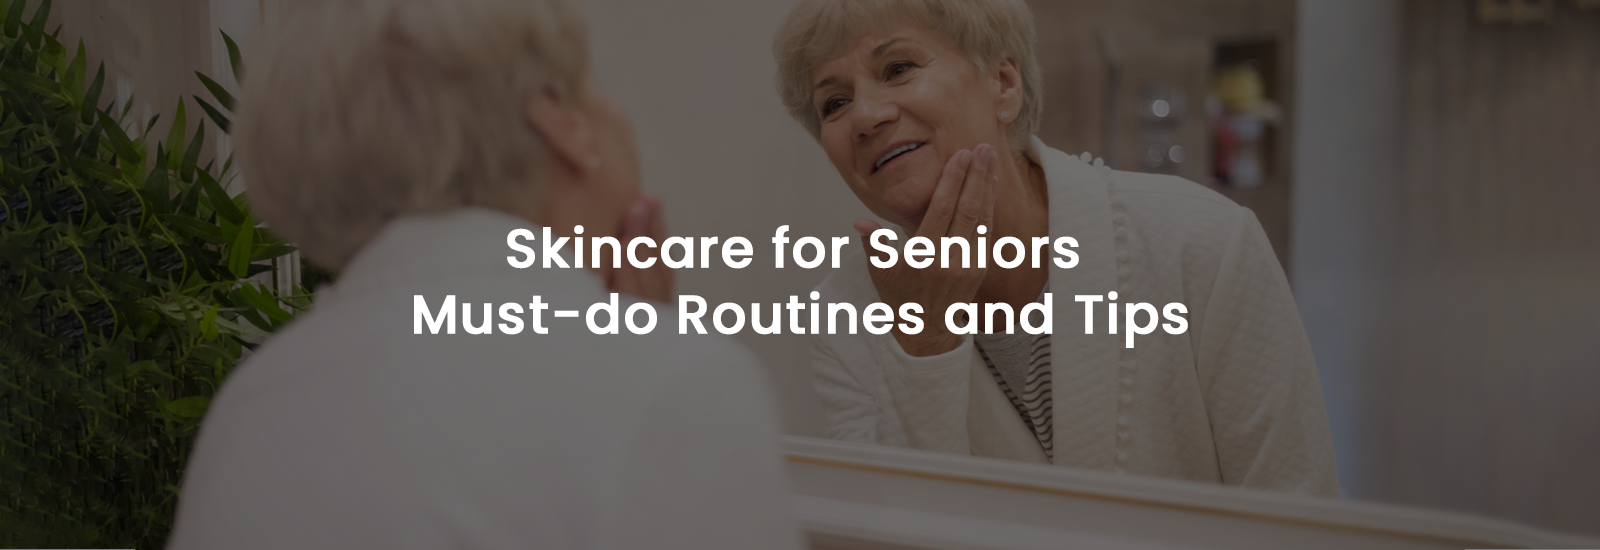 Skincare for Seniors – Must-do Routines and Tips | Banner Image